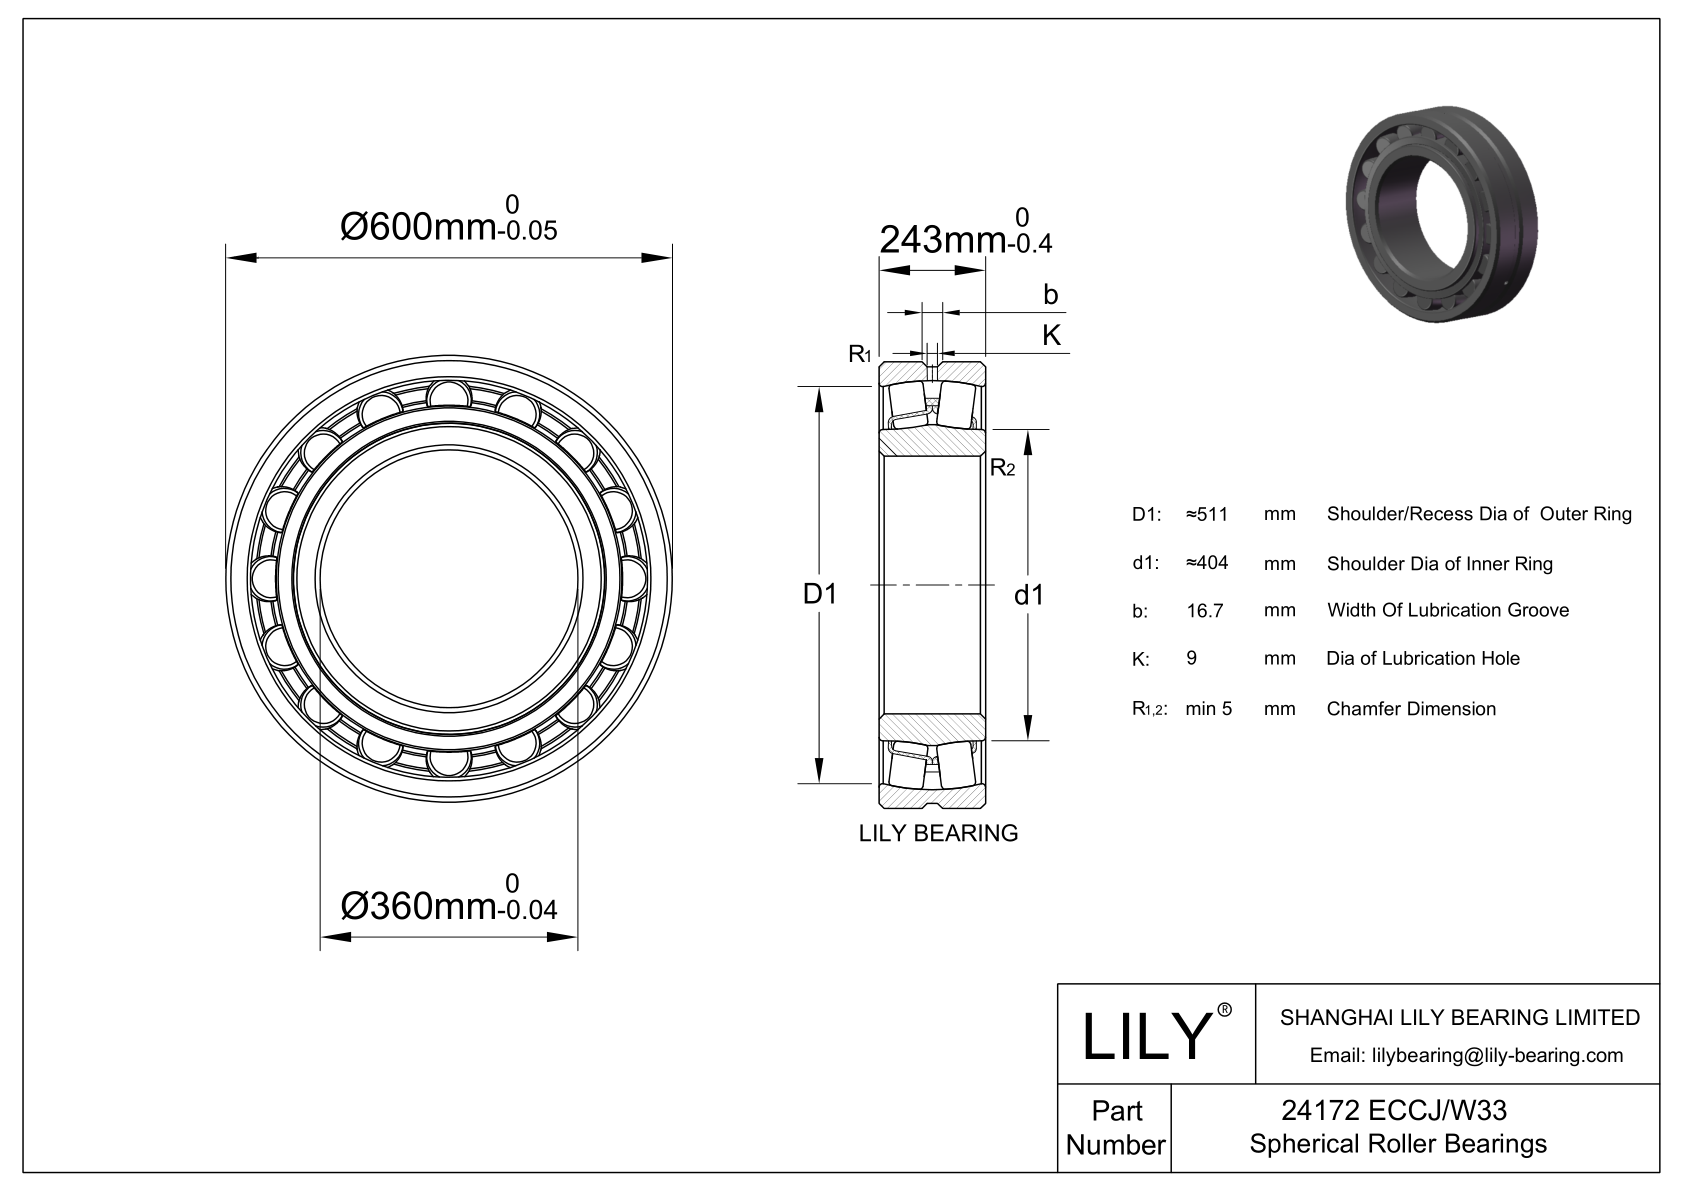 24172 ECCJ/W33 Double Row Spherical Roller Bearing cad drawing